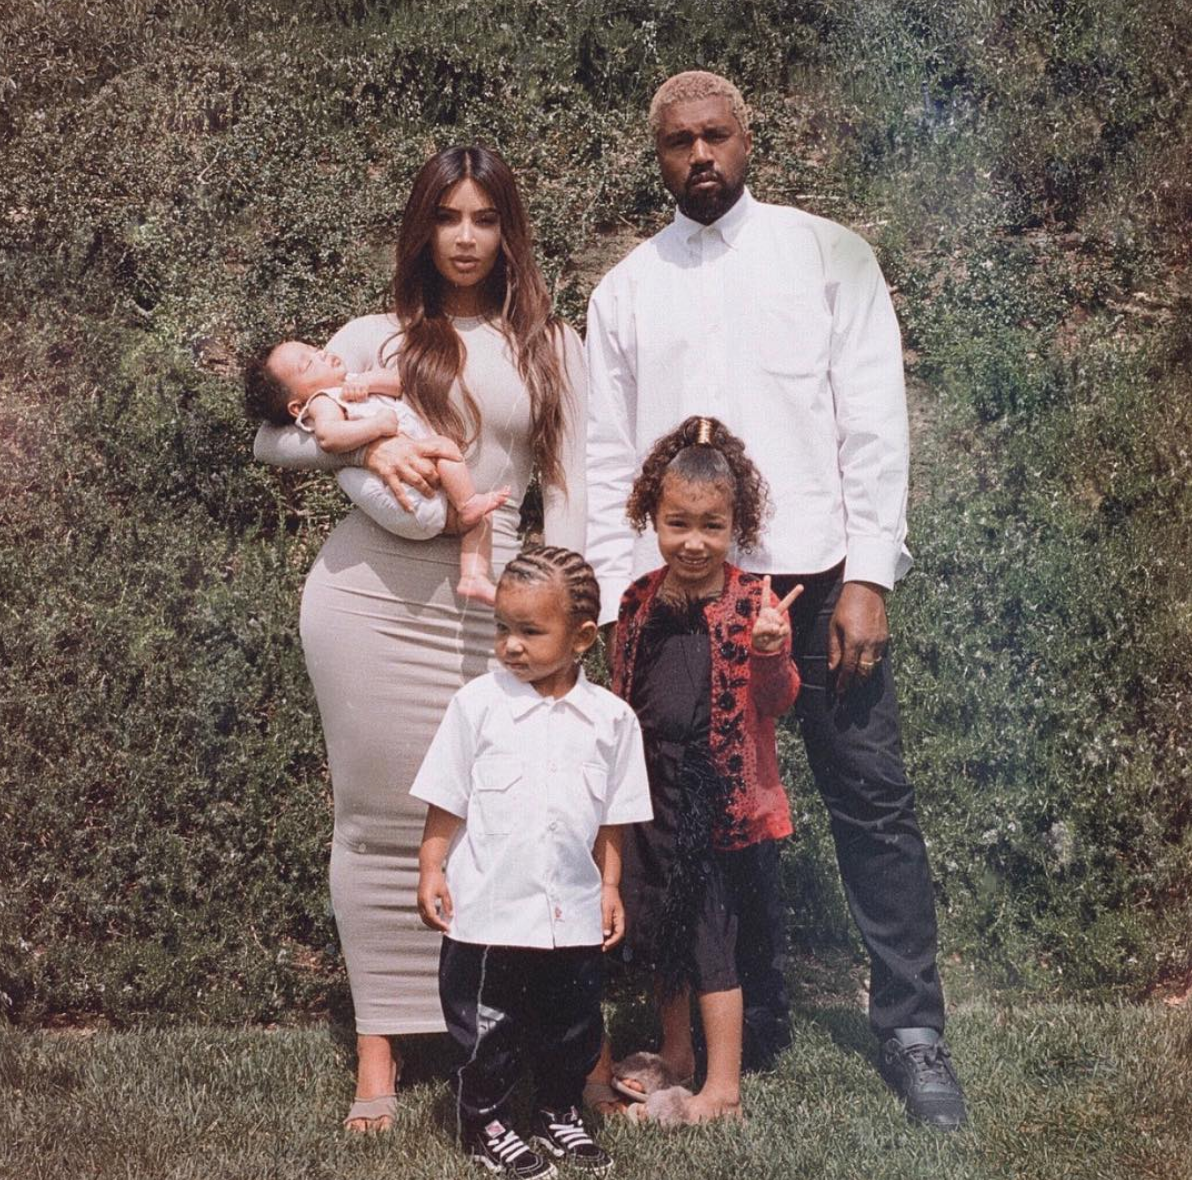 Mini Kanyes: North, Saint, And Chicago West Are Too Adorable In New Family Photo
